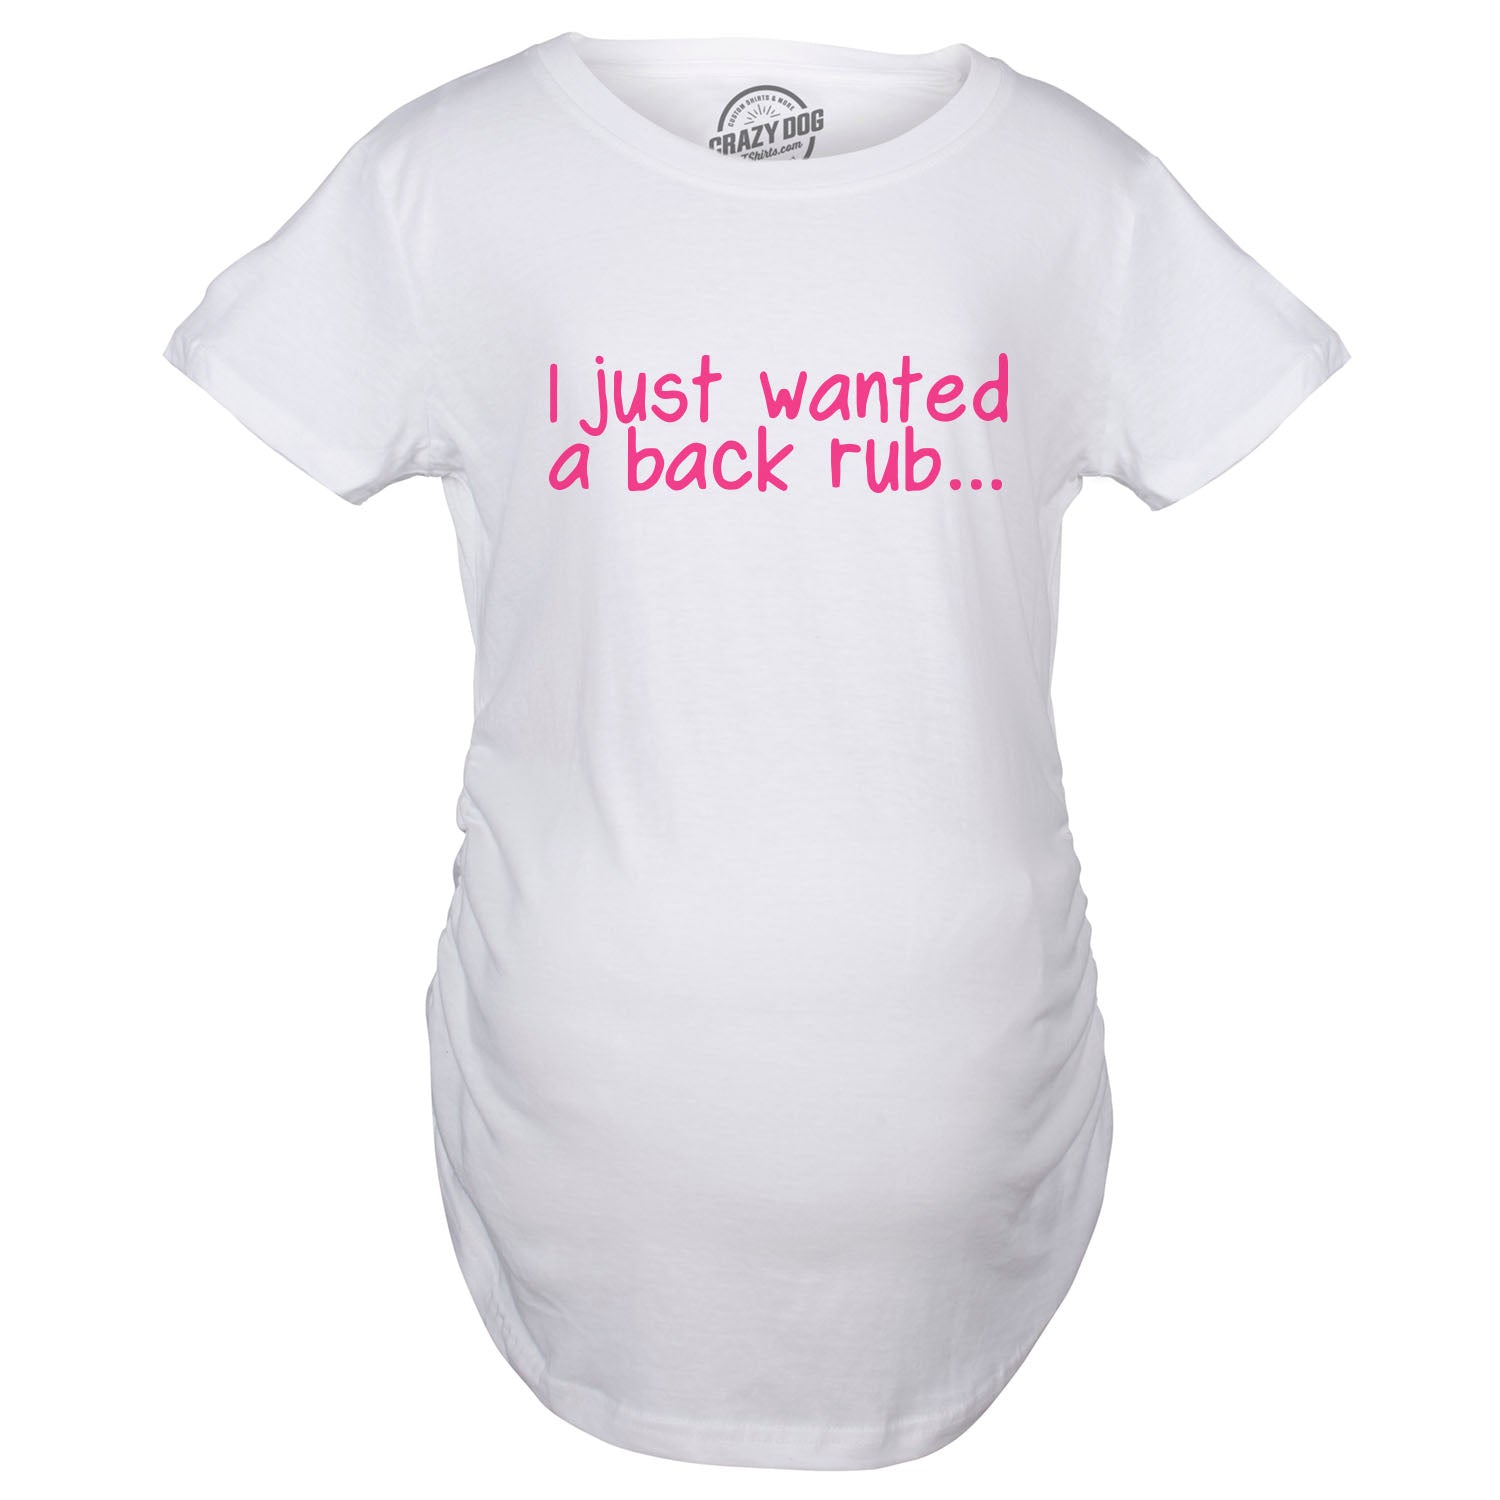 Funny White I Just Wanted a Back Rub Maternity T Shirt Nerdy Tee